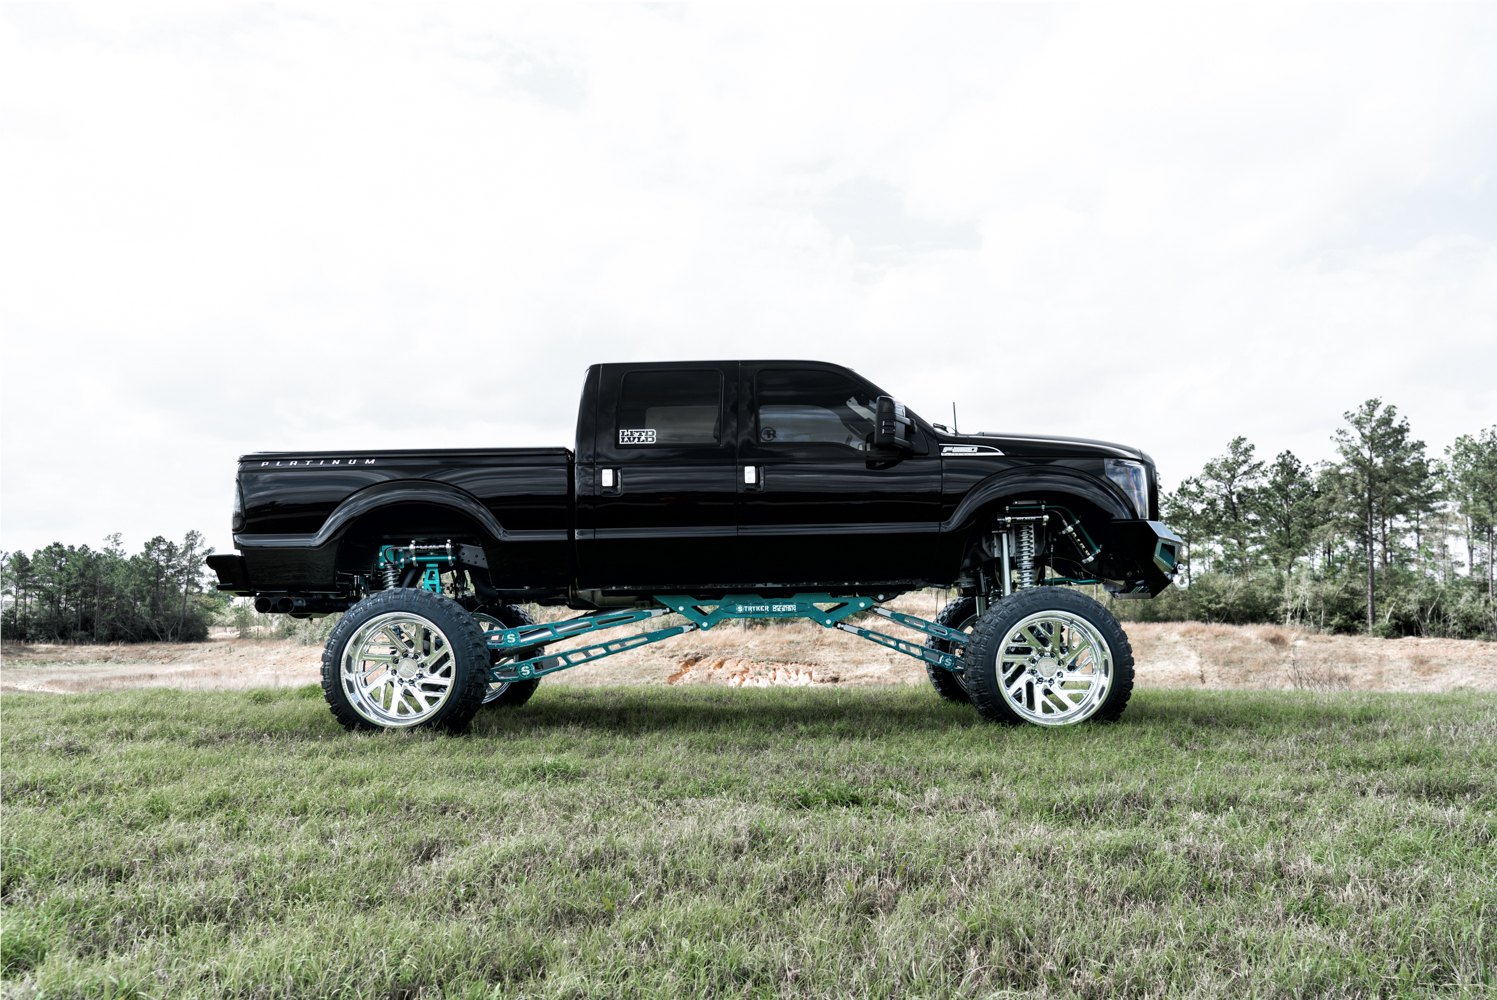 Fully Custom Black F250 With a Massive Lift and 40" Wheels - Photo by Dale Martin